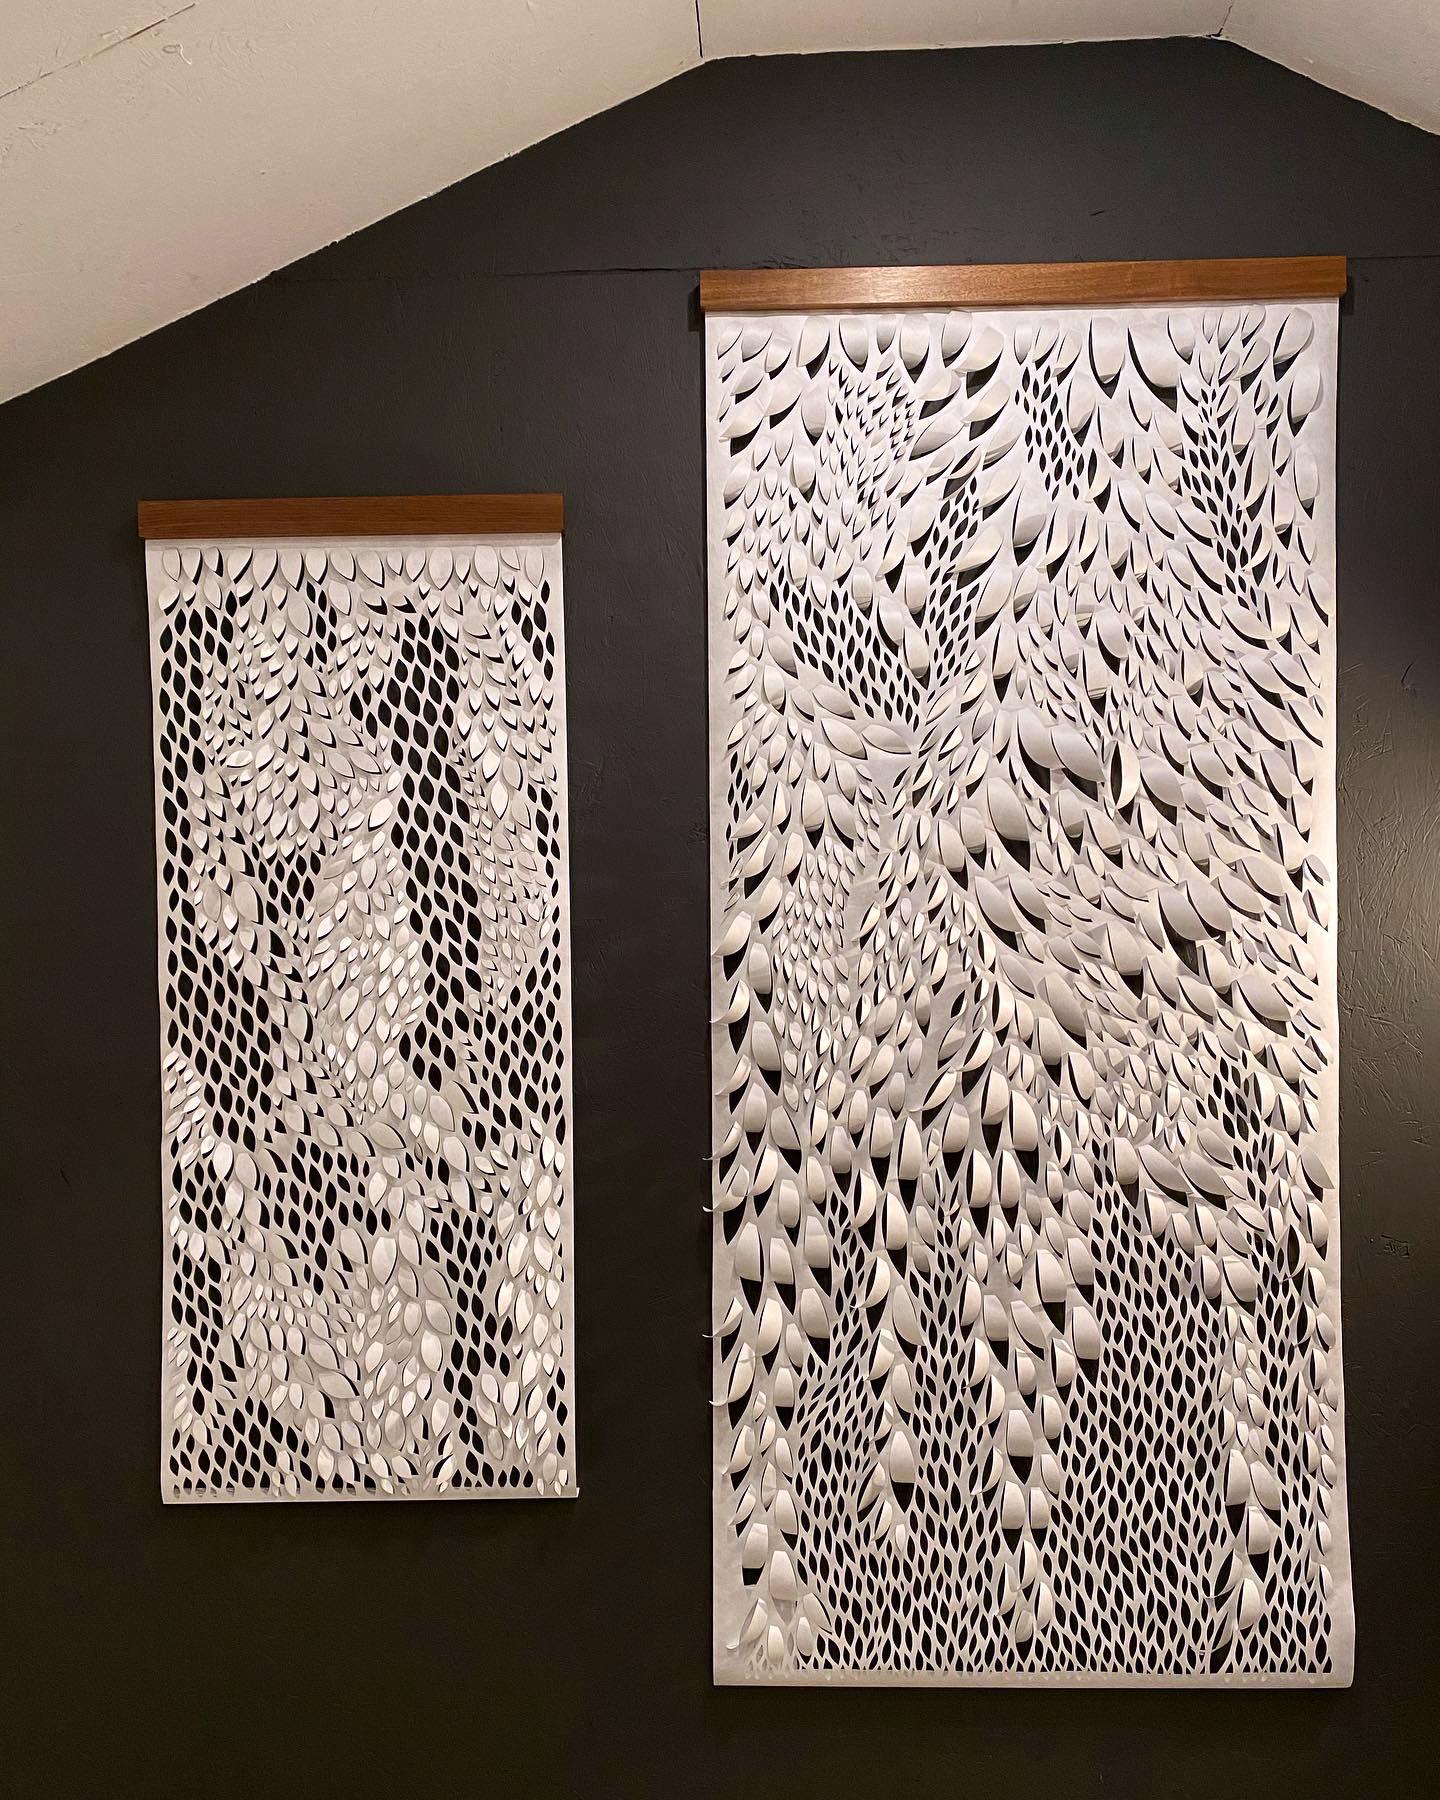 White paper organically cut into leaf like fluid patterns creating a natural hanging sculpture.  Each wall hanging is hand-cut (not laser) out of Tyvek, a synthetic paper that is incredibly durable. These pieces are dust, water, mildew, and tear